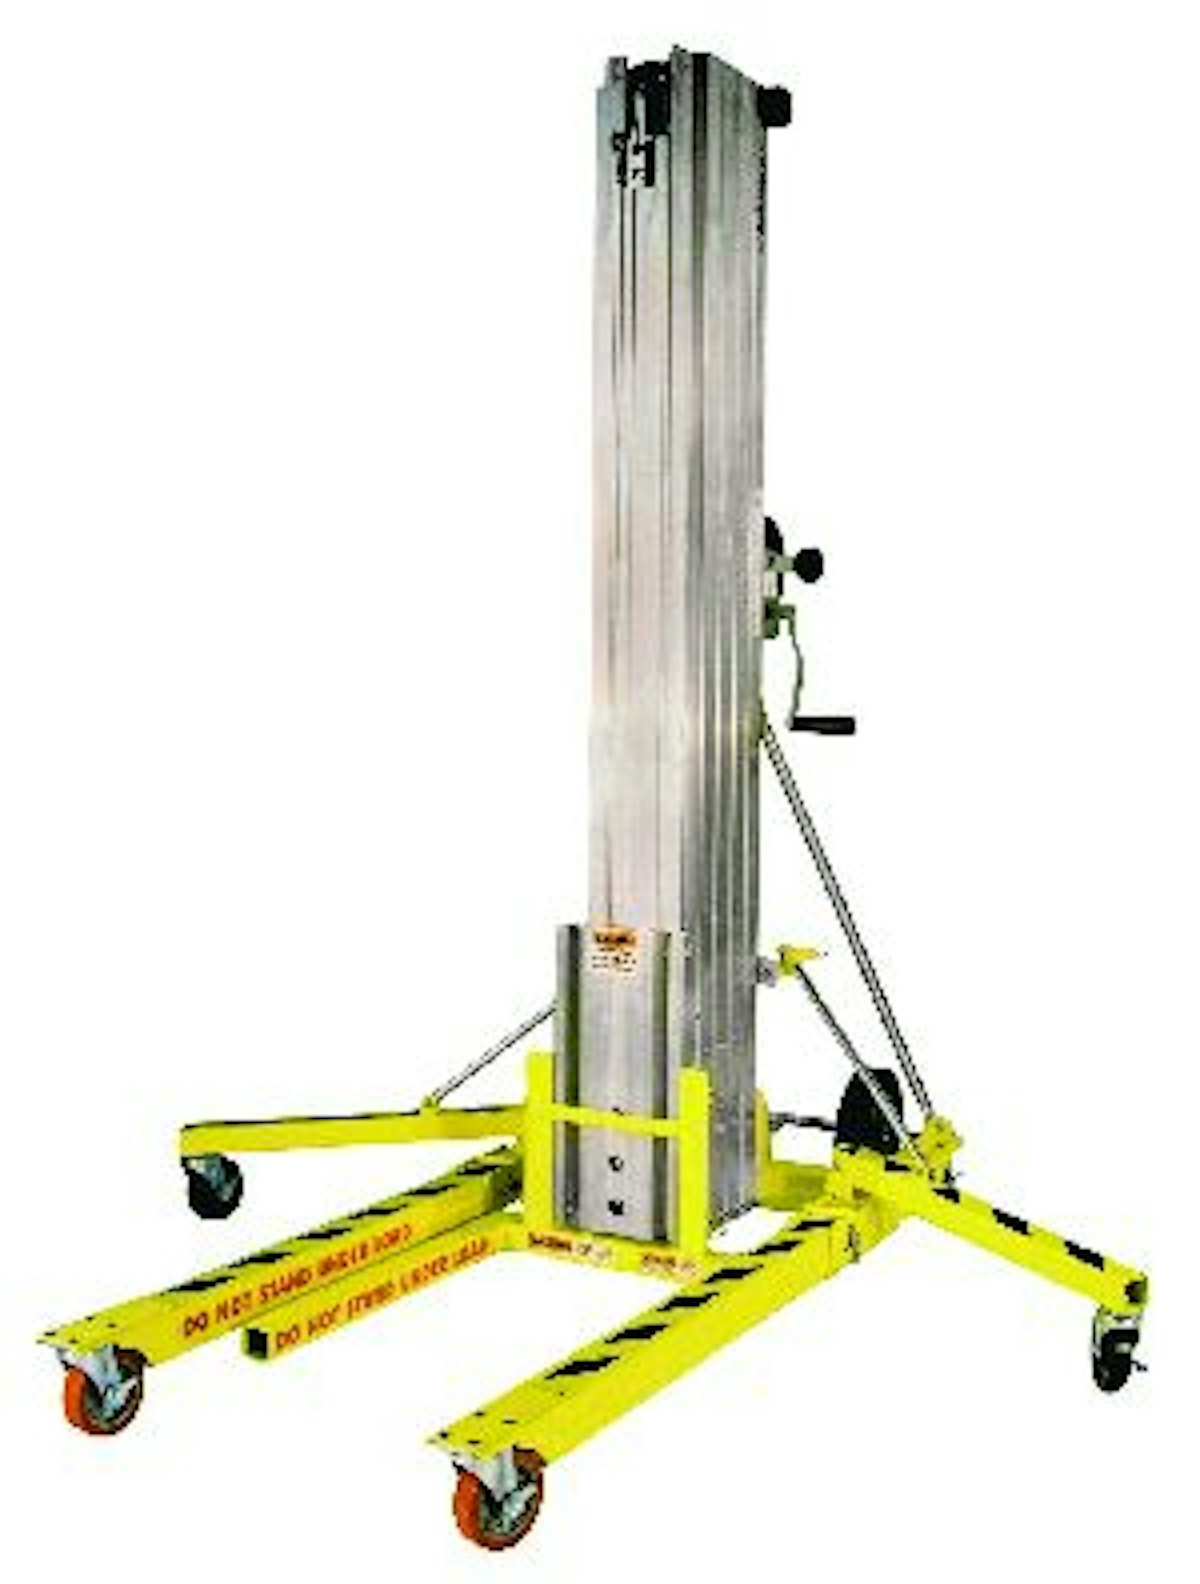 Genie SLC-24 Material Superlift for Sale or Rent - CanLift